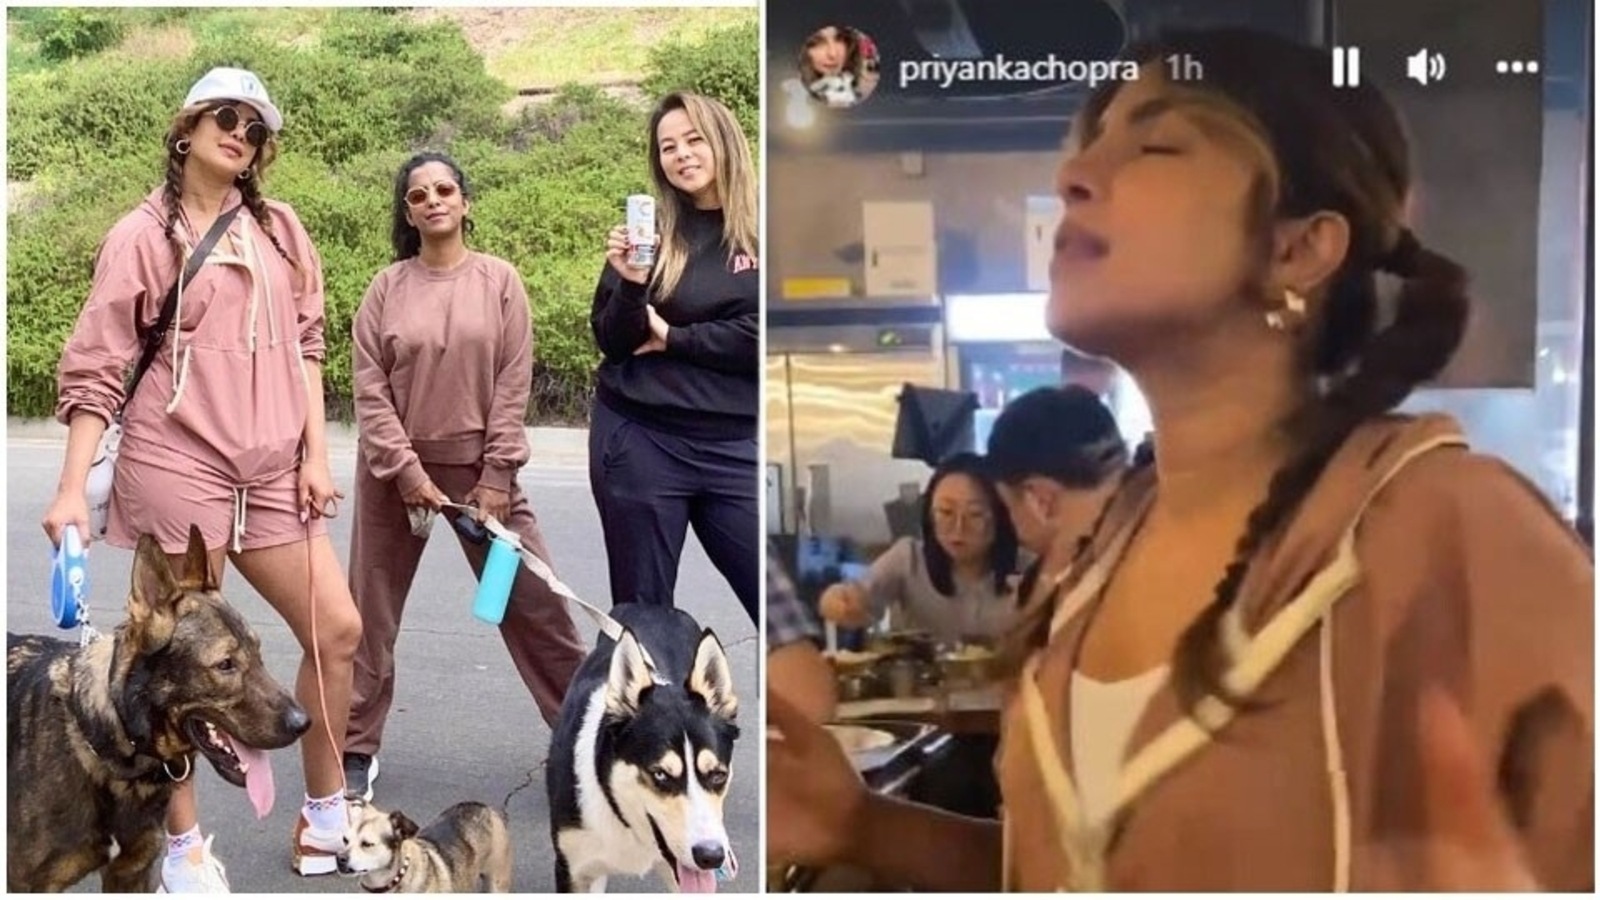 Priyanka Chopra shakes after overeating to make space for food as she spends Sunday with friends, enjoys Korean barbecue